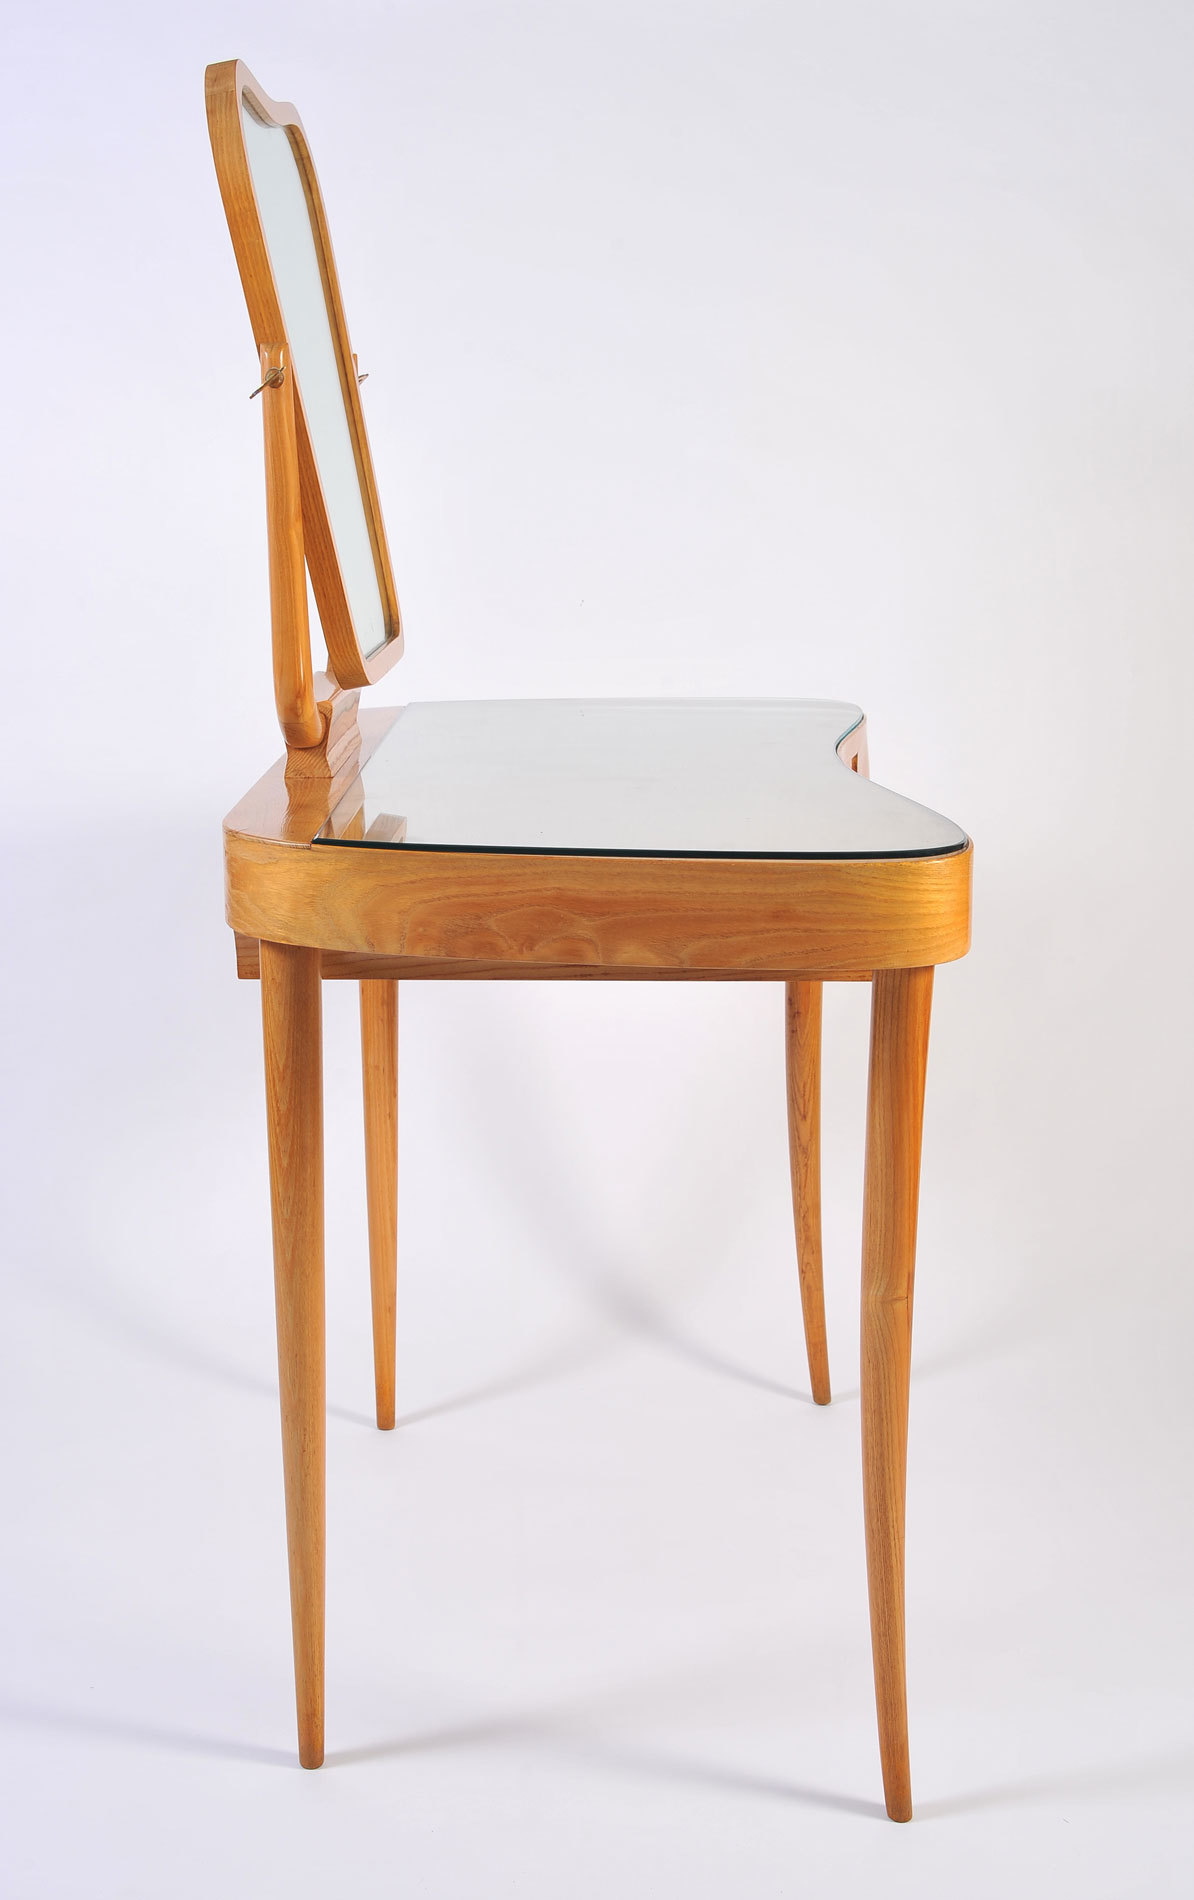 The image for Wood Italian Dressing Table 03